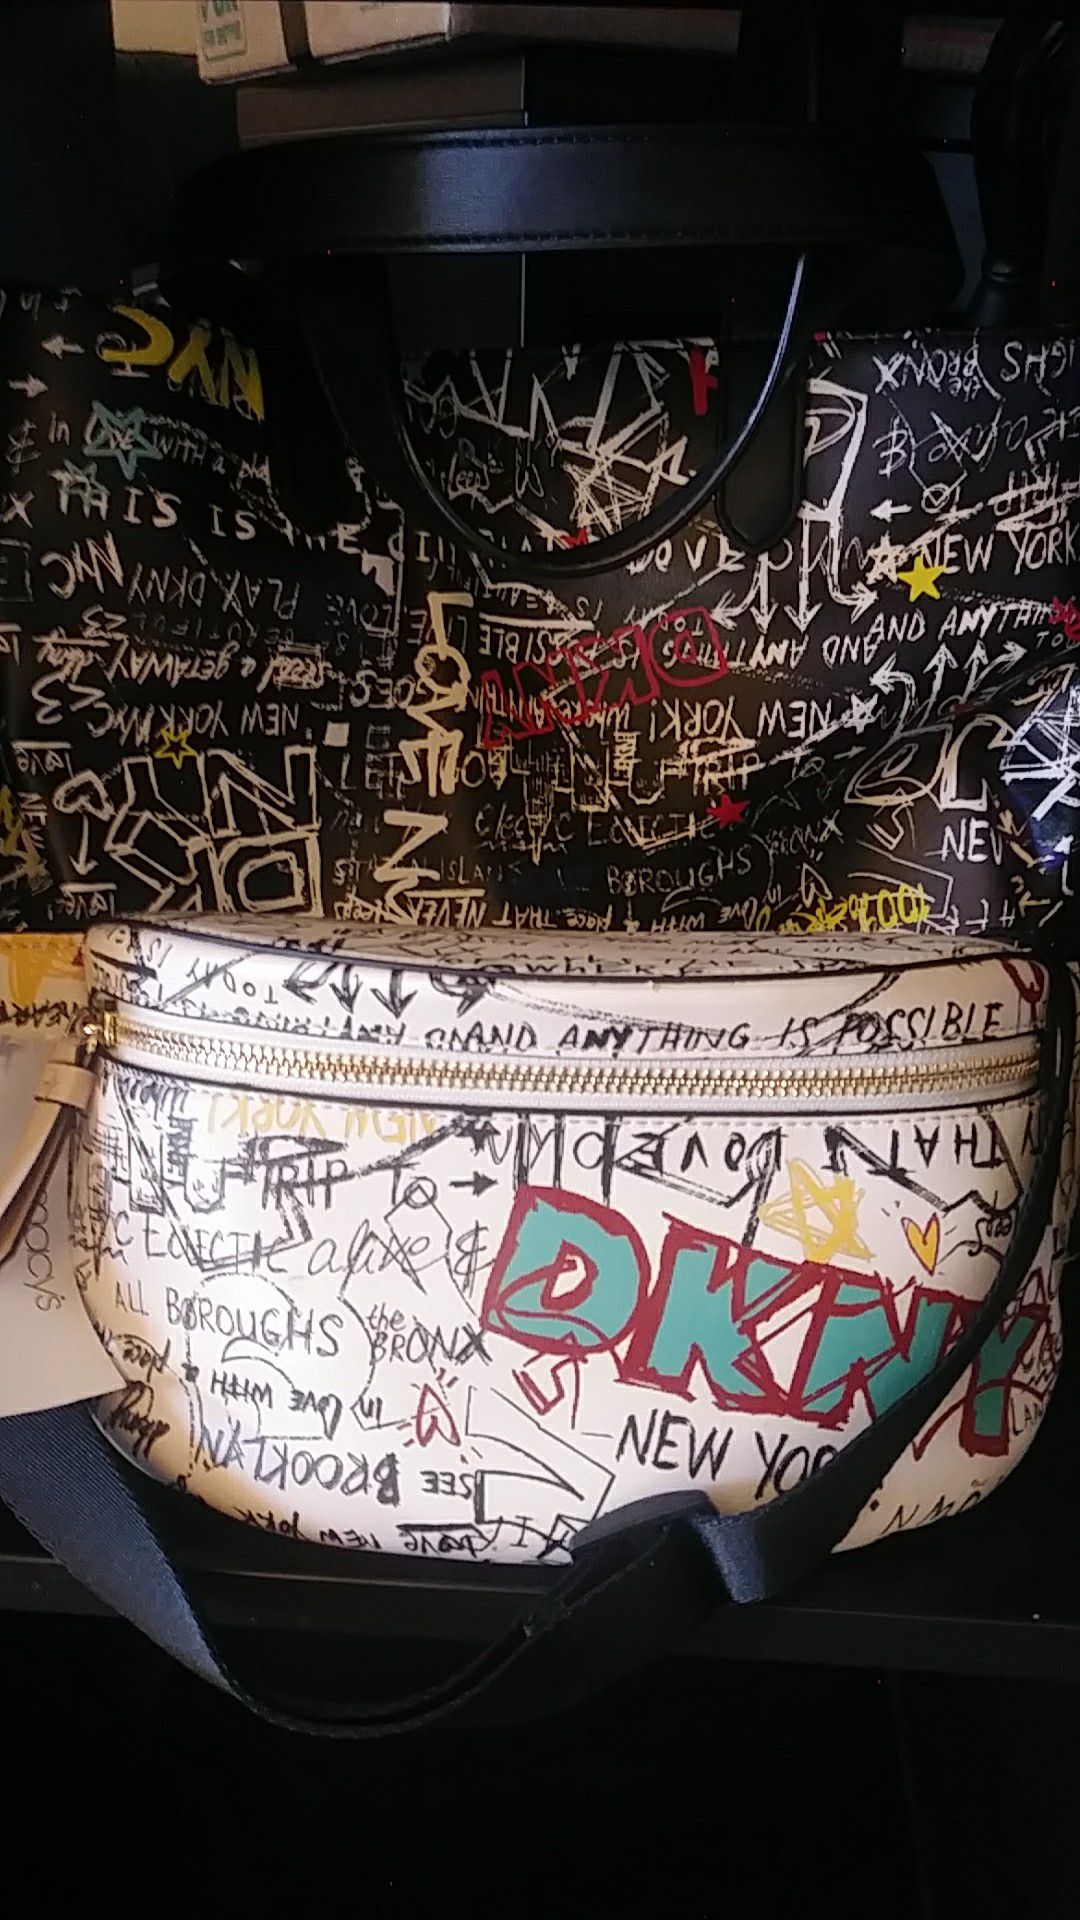 DKNY waist pack and hand bag - New!